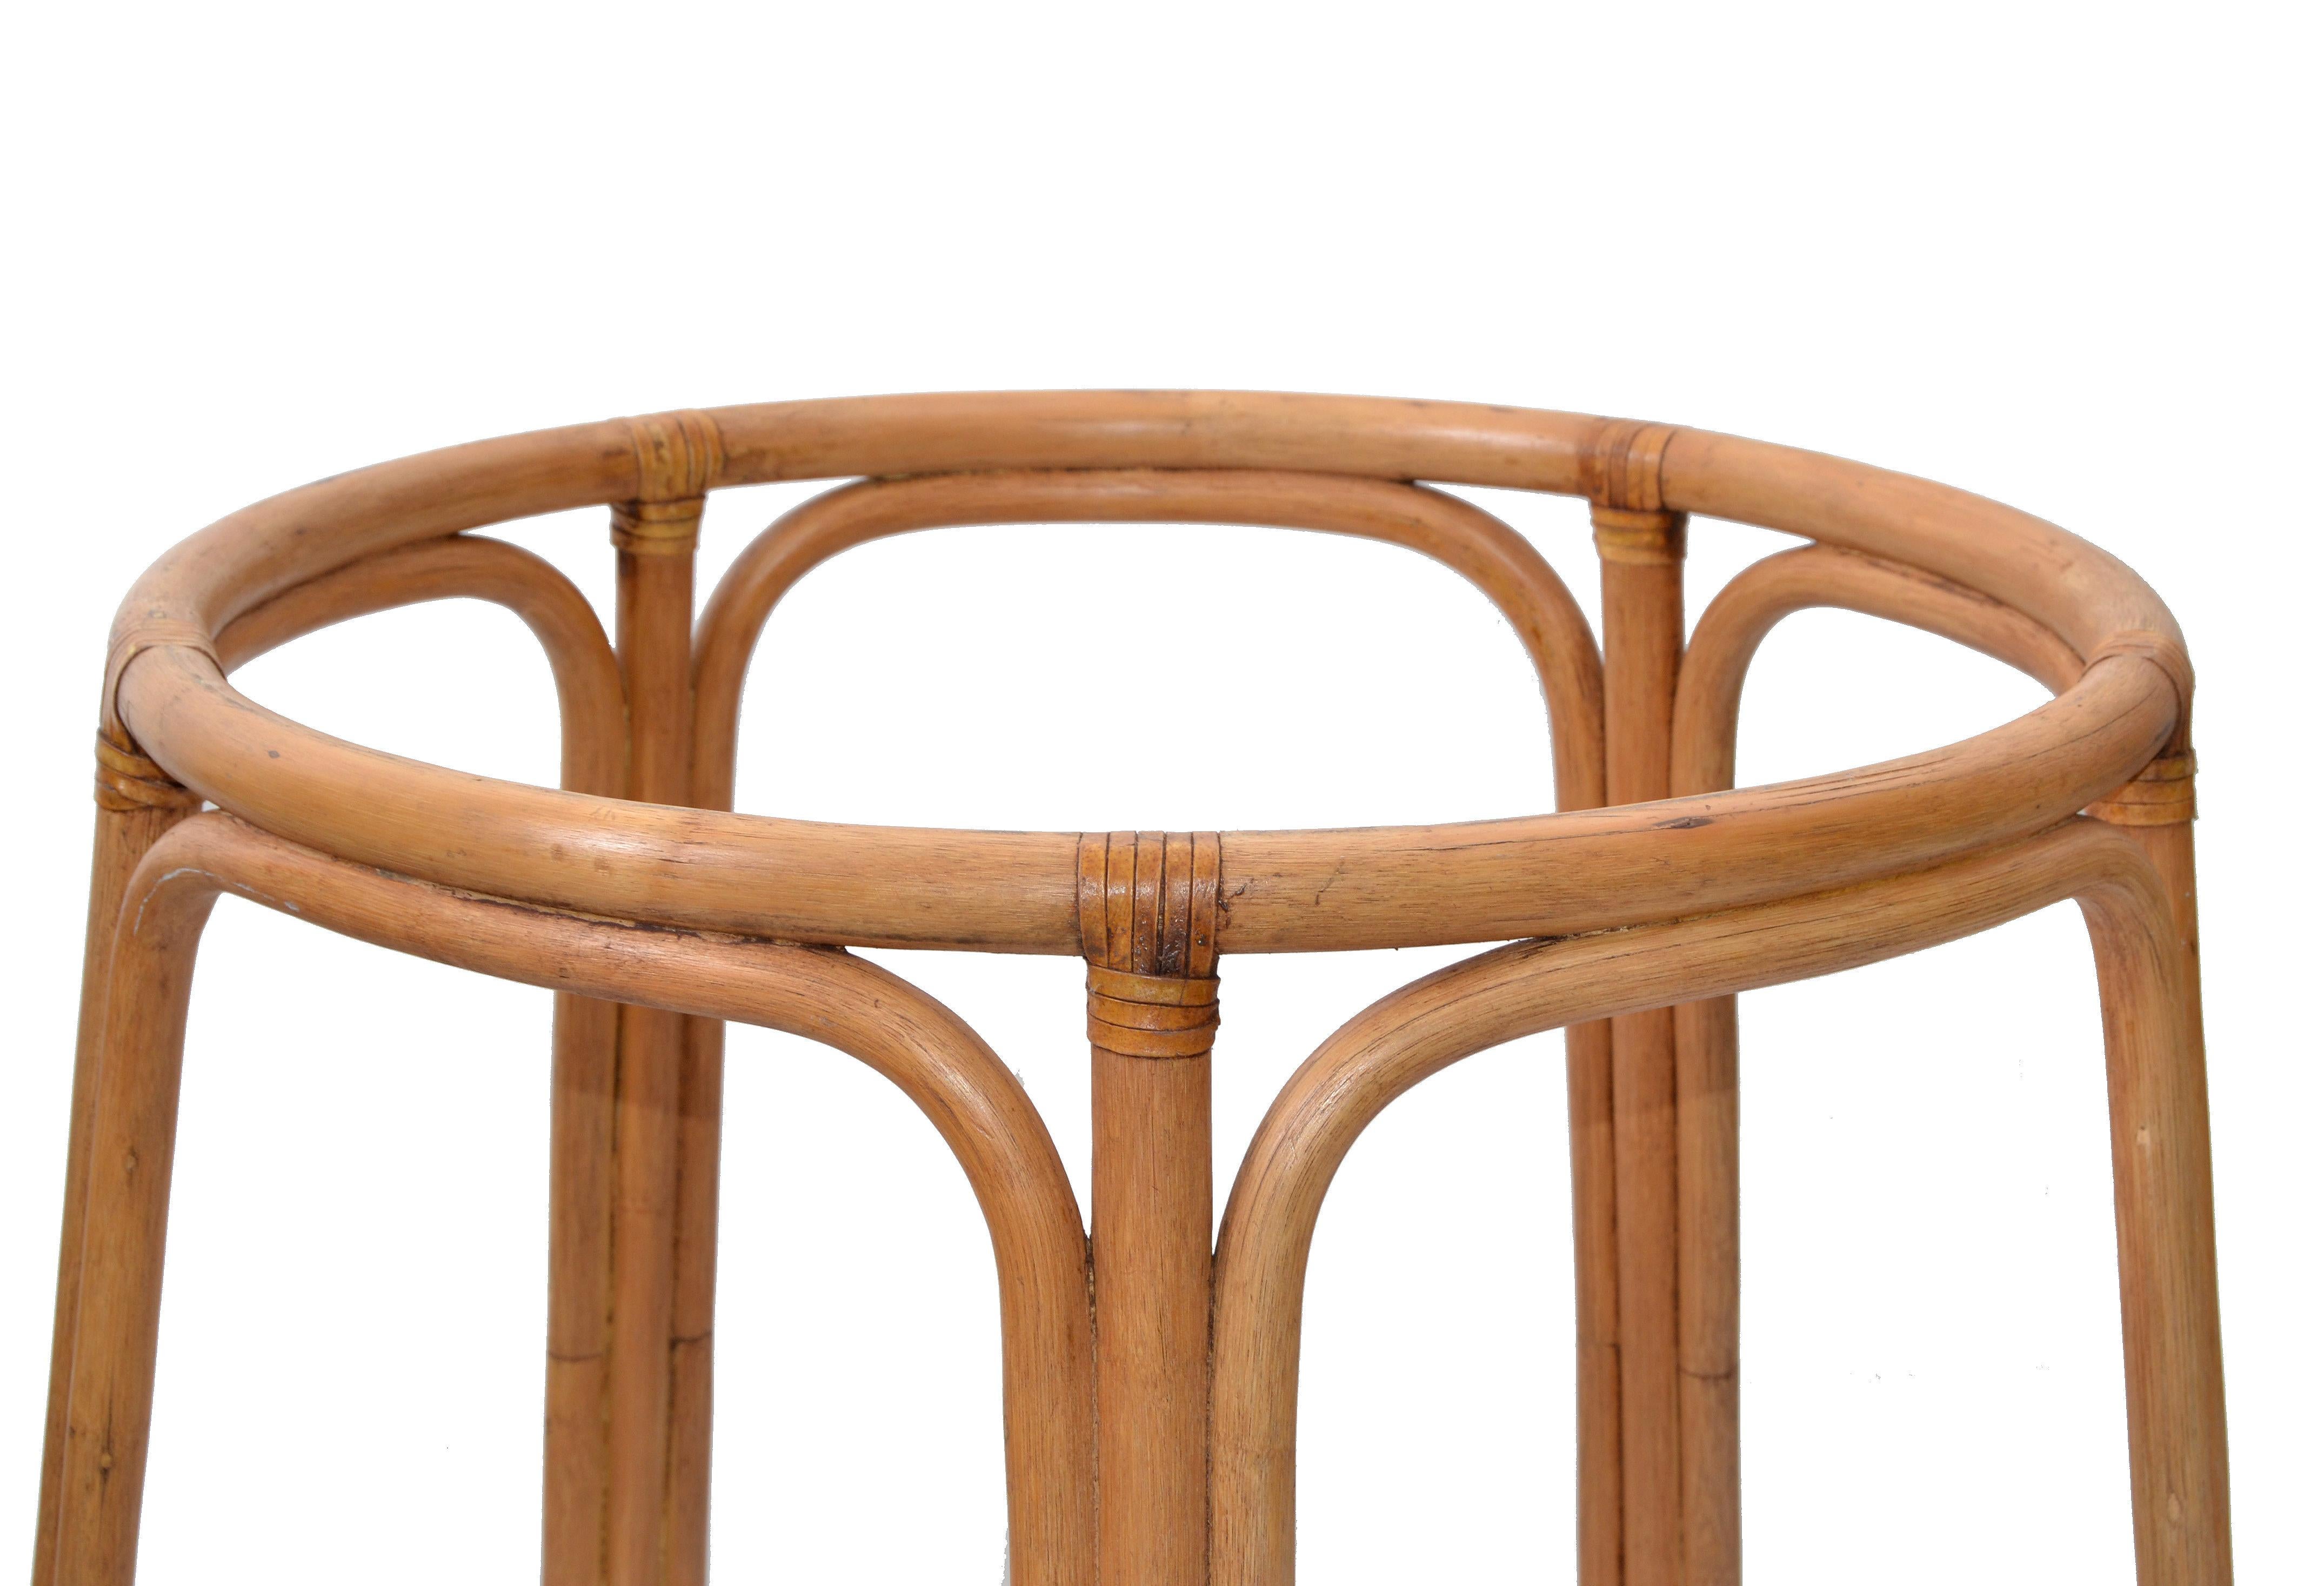 Hand-Crafted Boho Chic Mid-Century Modern Bamboo and Wicker Dining Table Base American, 1970s